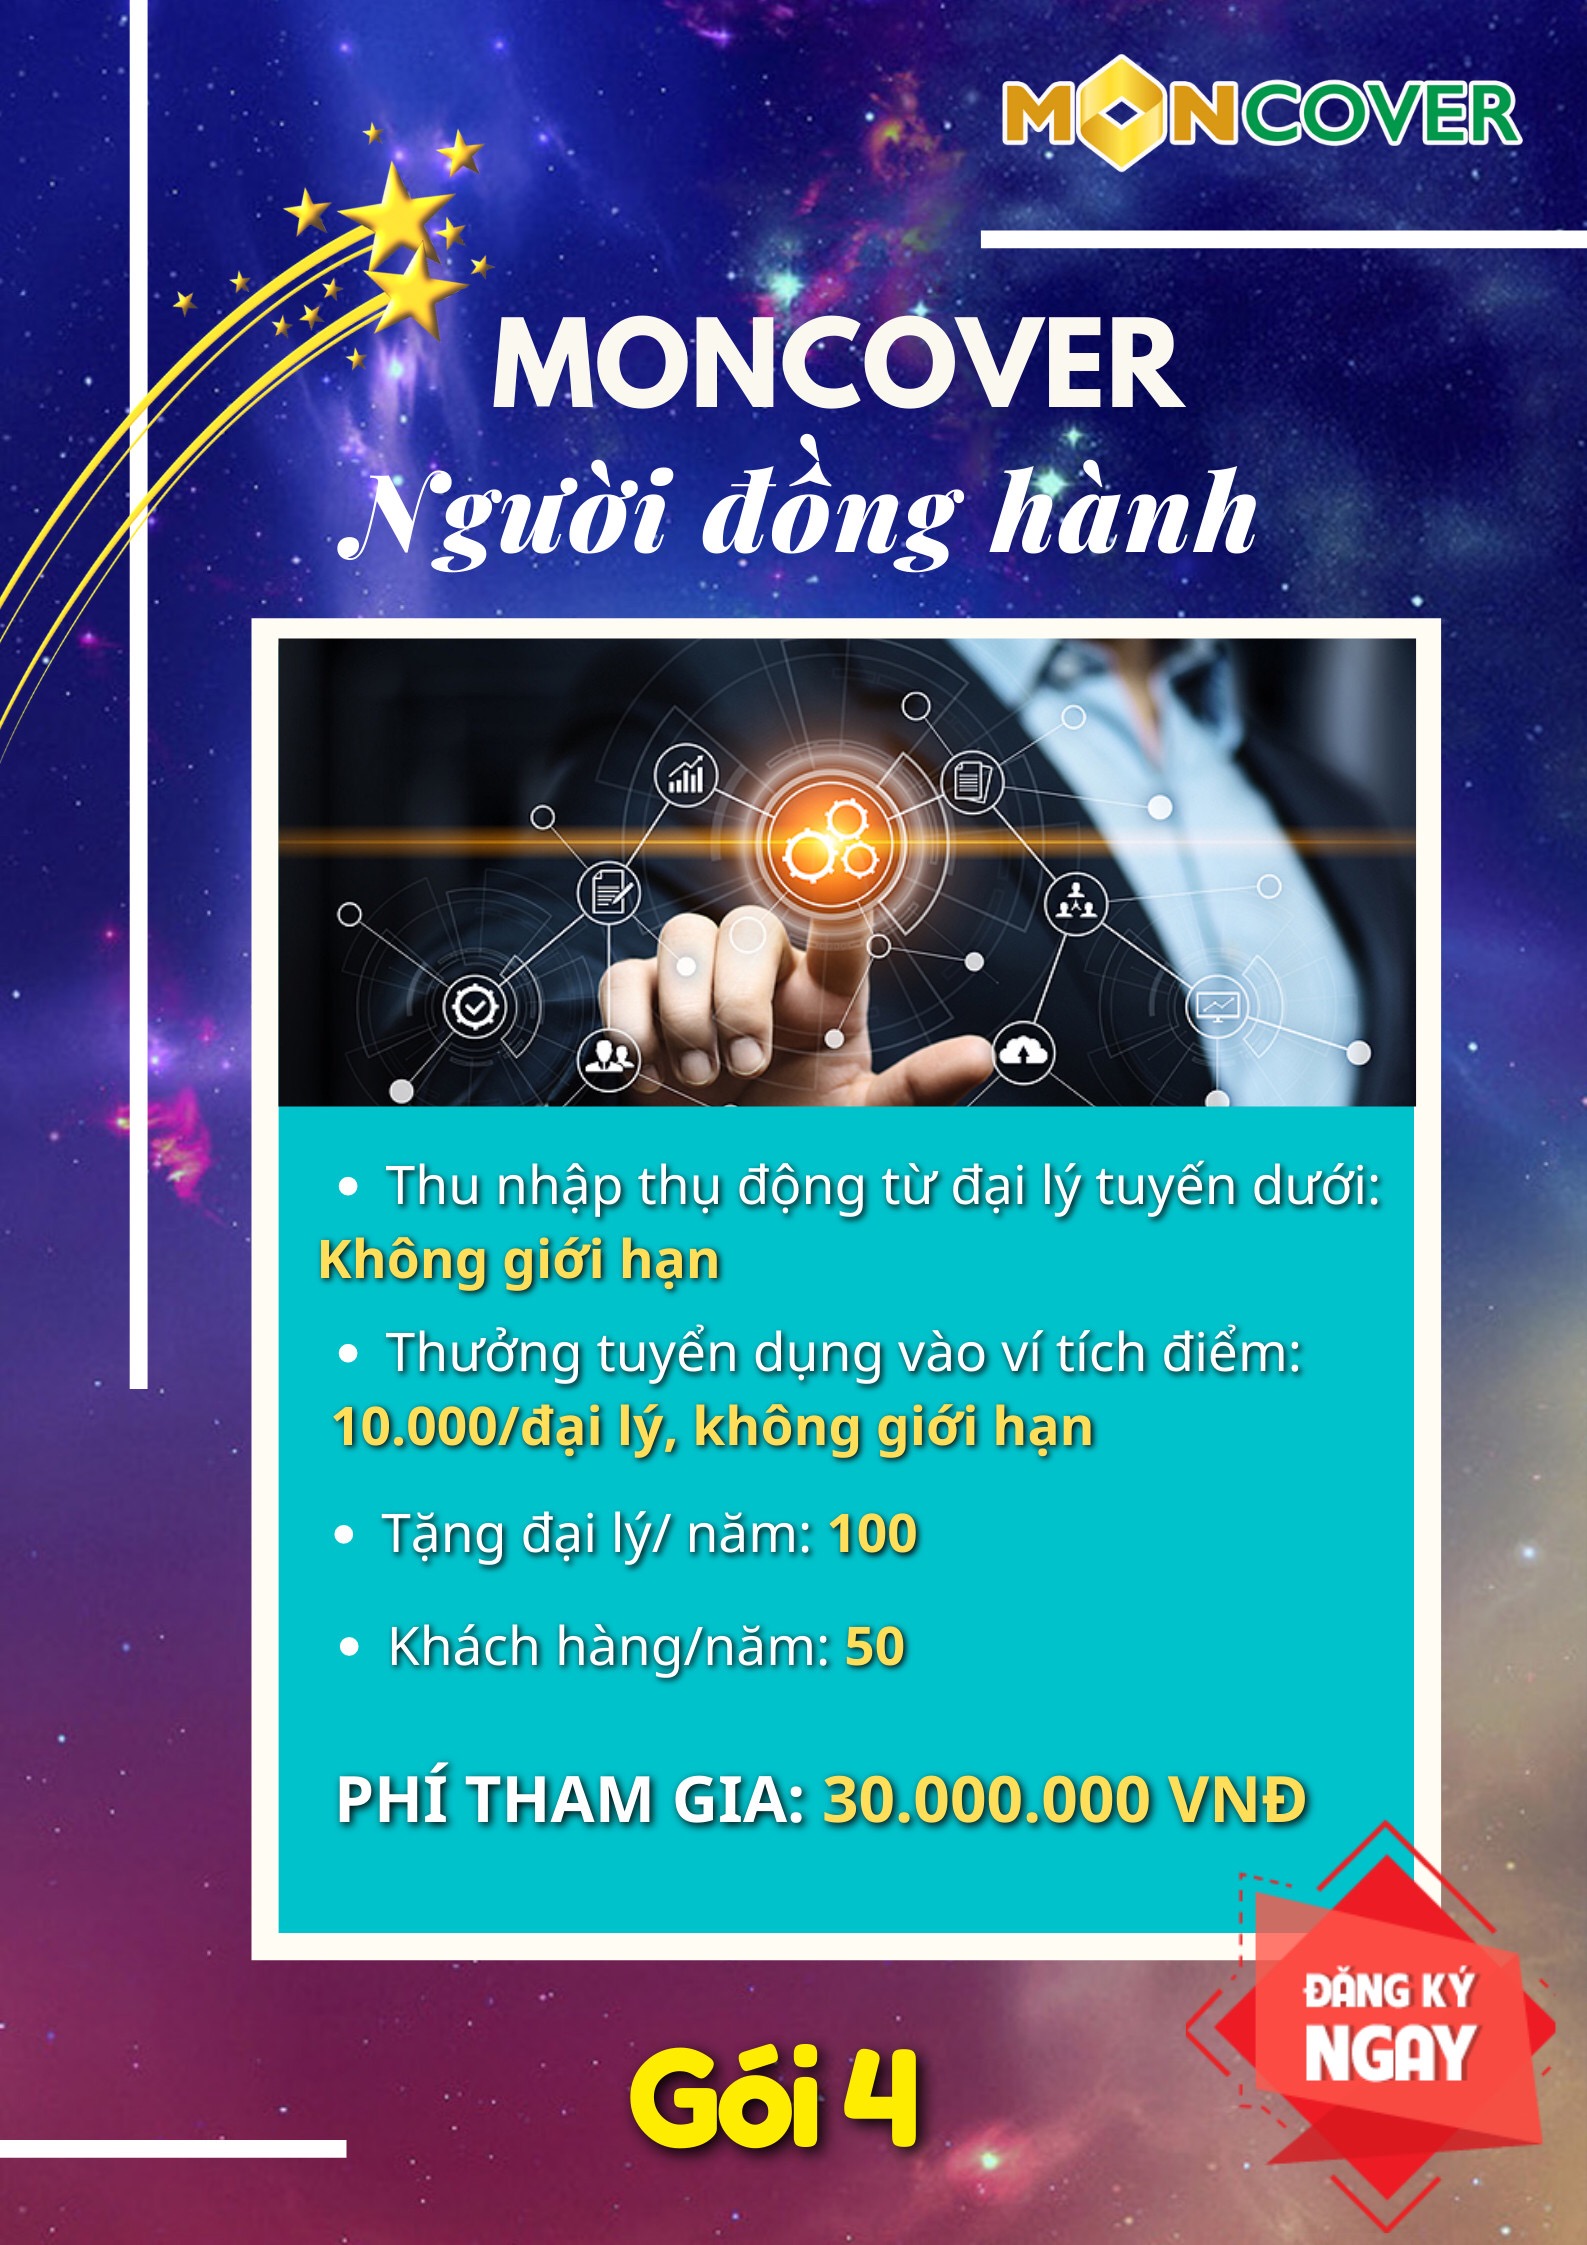 nguoi dong hanh moncover